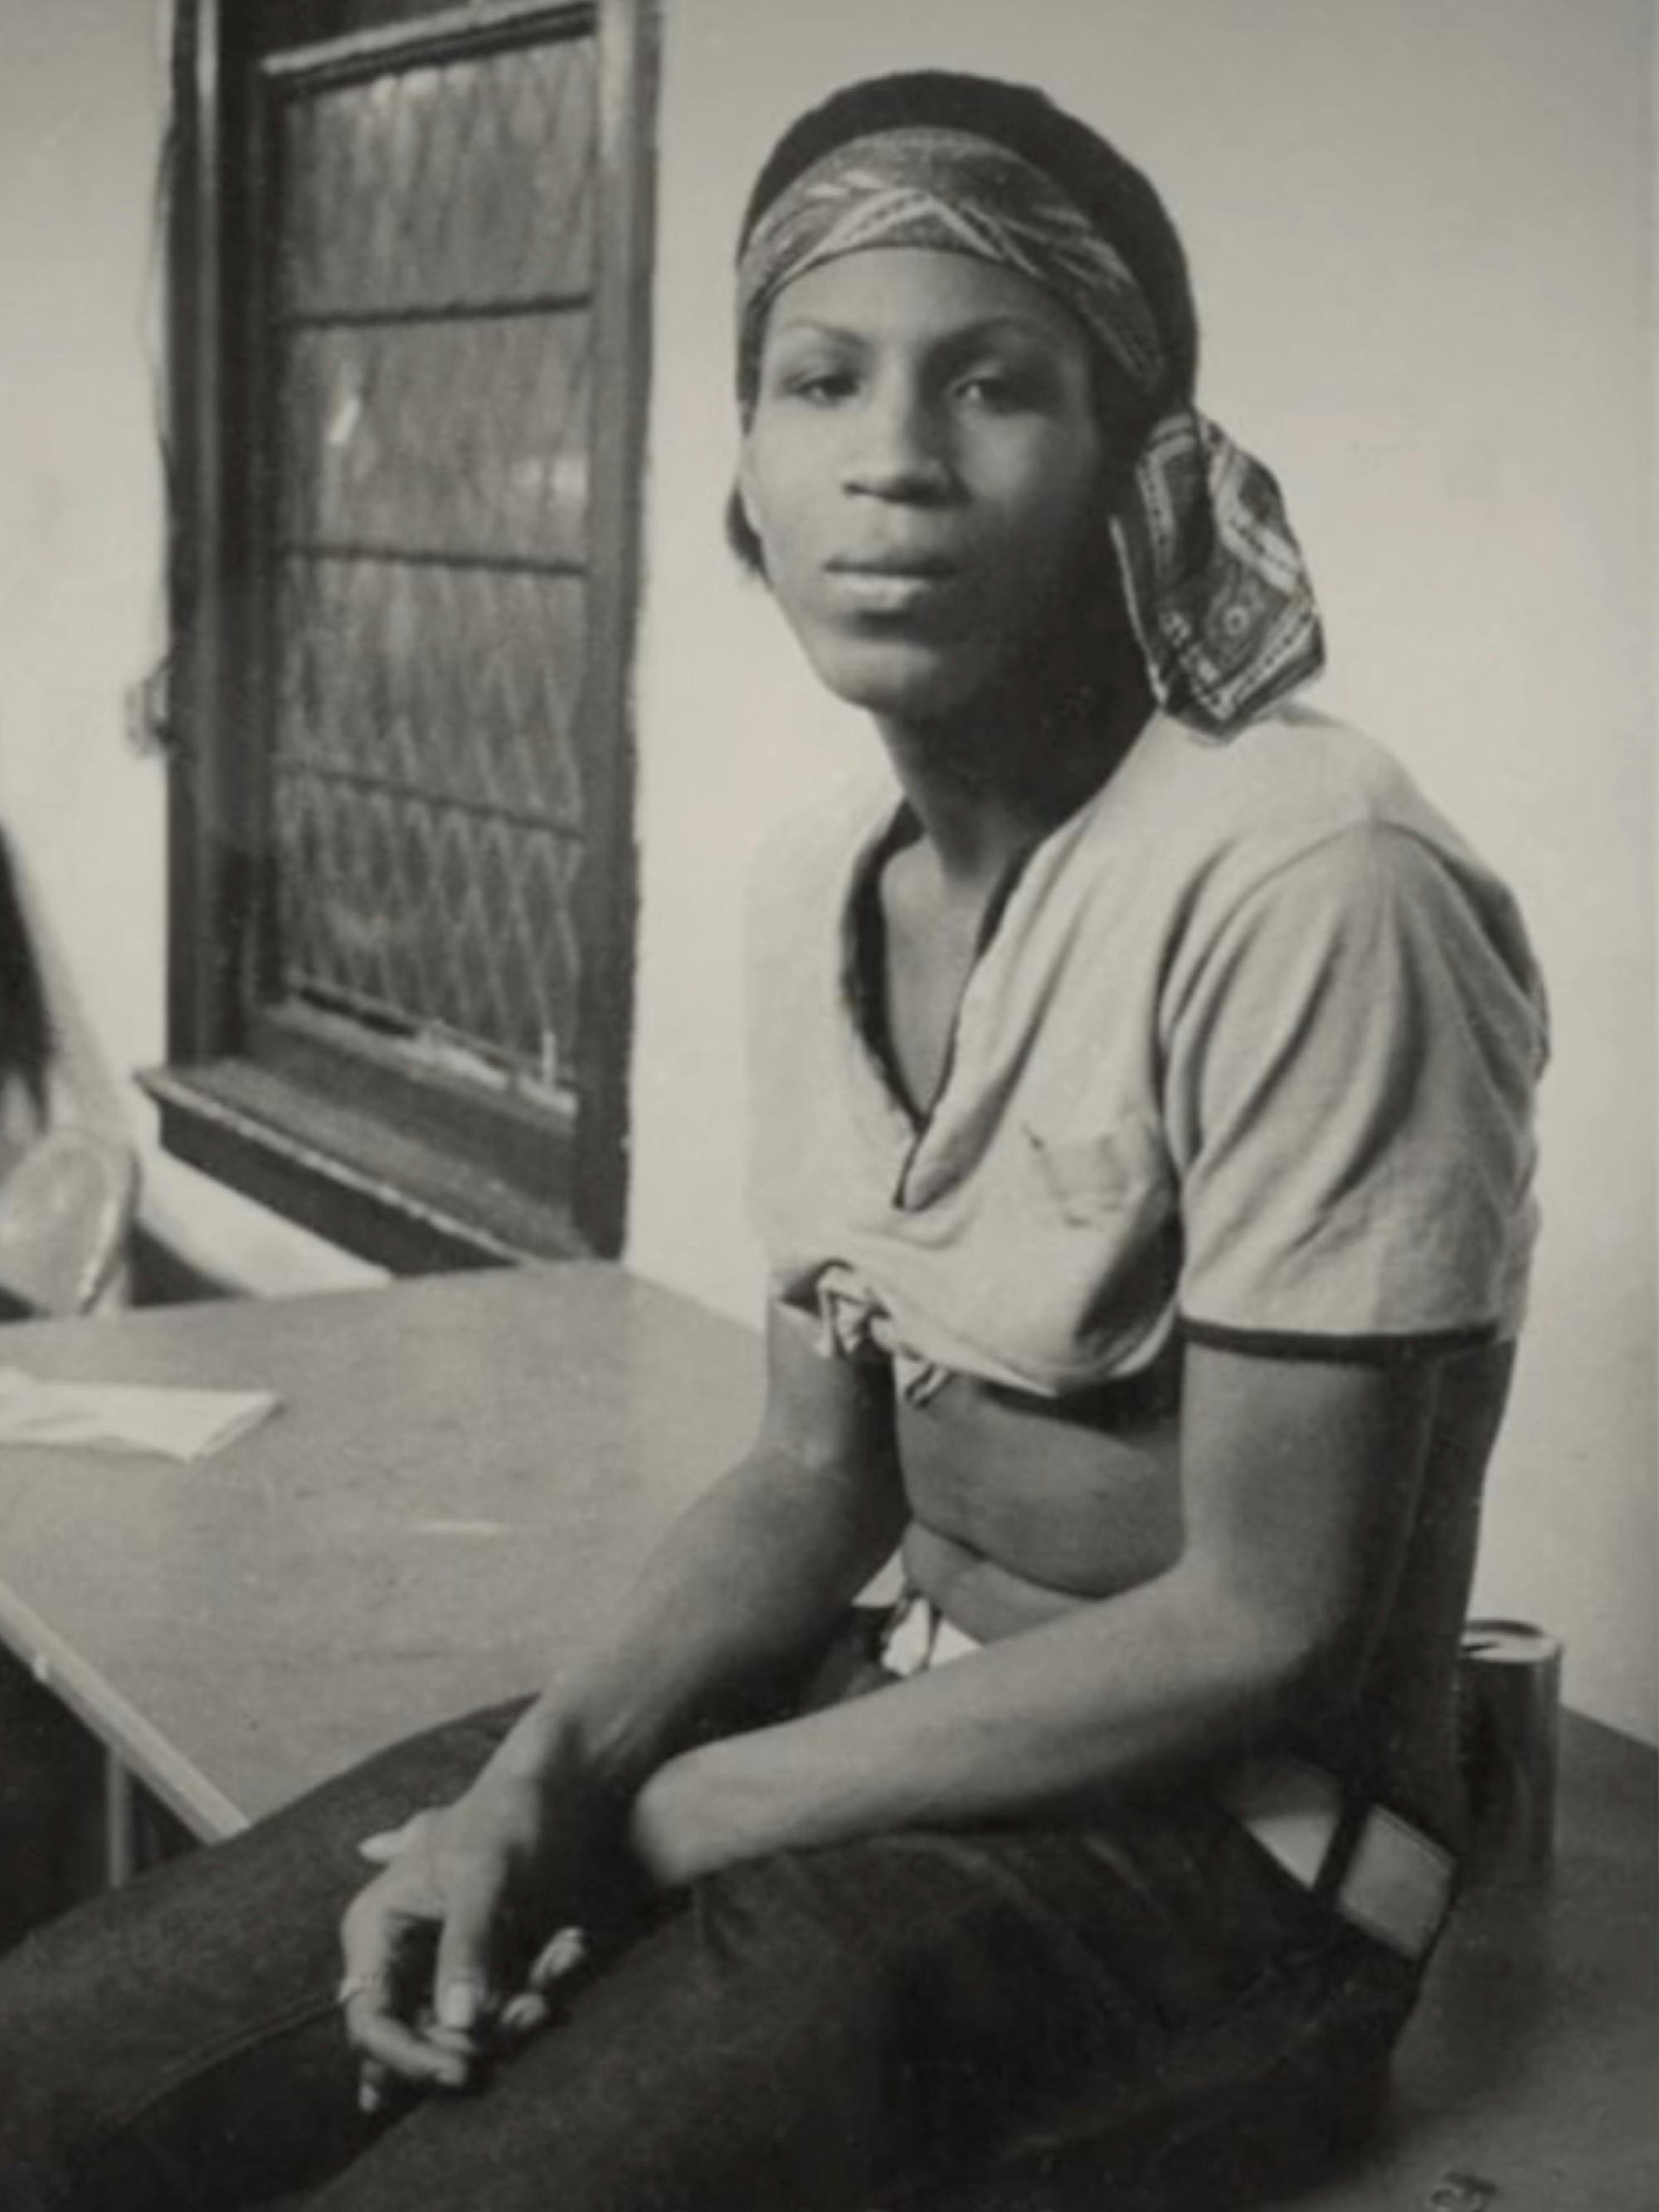 An archival, sepia-toned photo of Zazu Nova perched on a desk, looking serious and casually stylish in a cropped t-shirt and bandana.